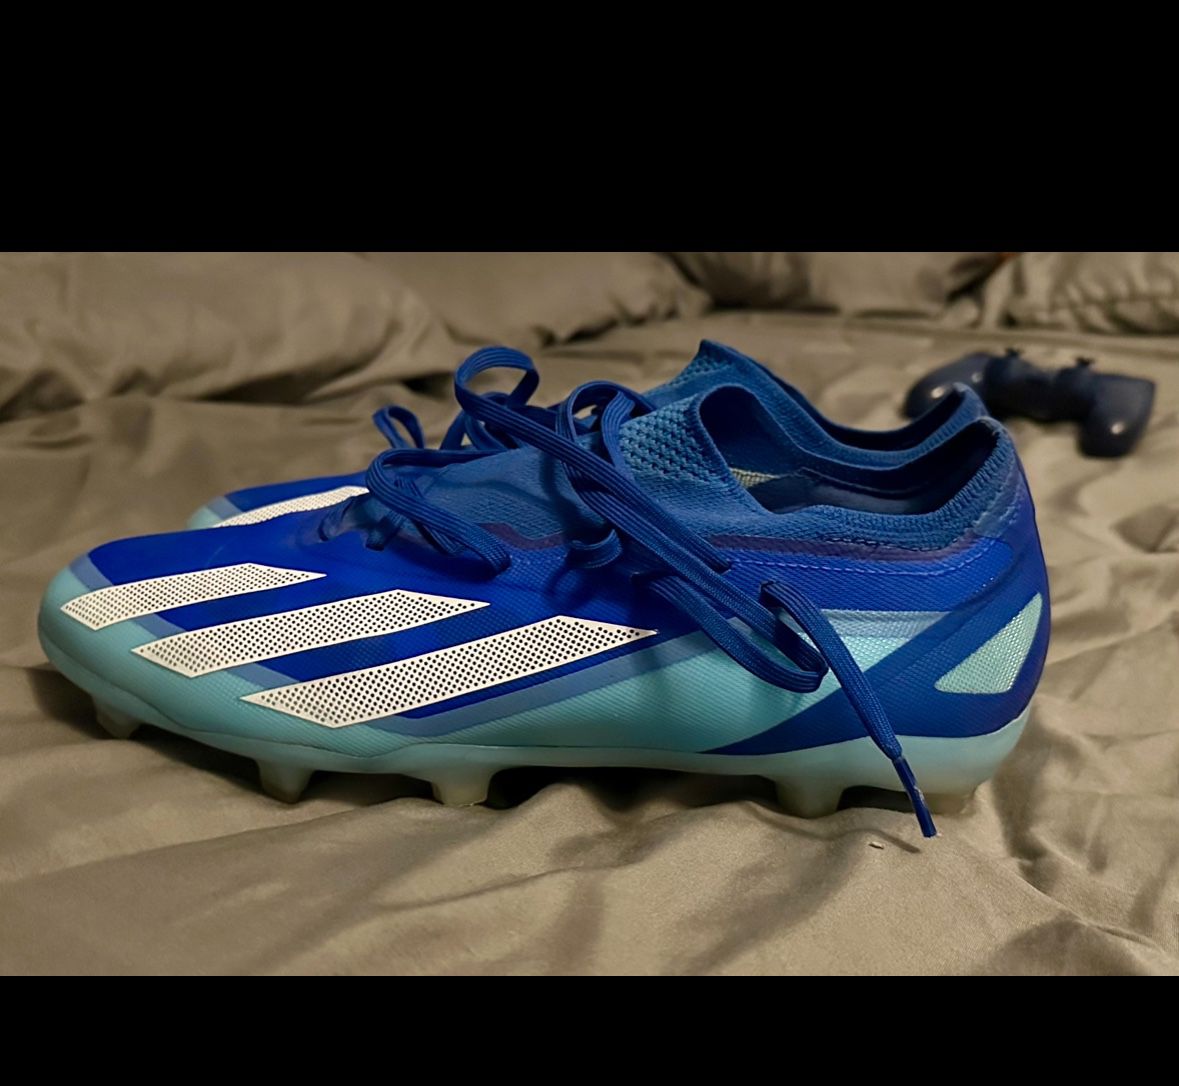 Adidas Crazy Fast Soccer Cleats  